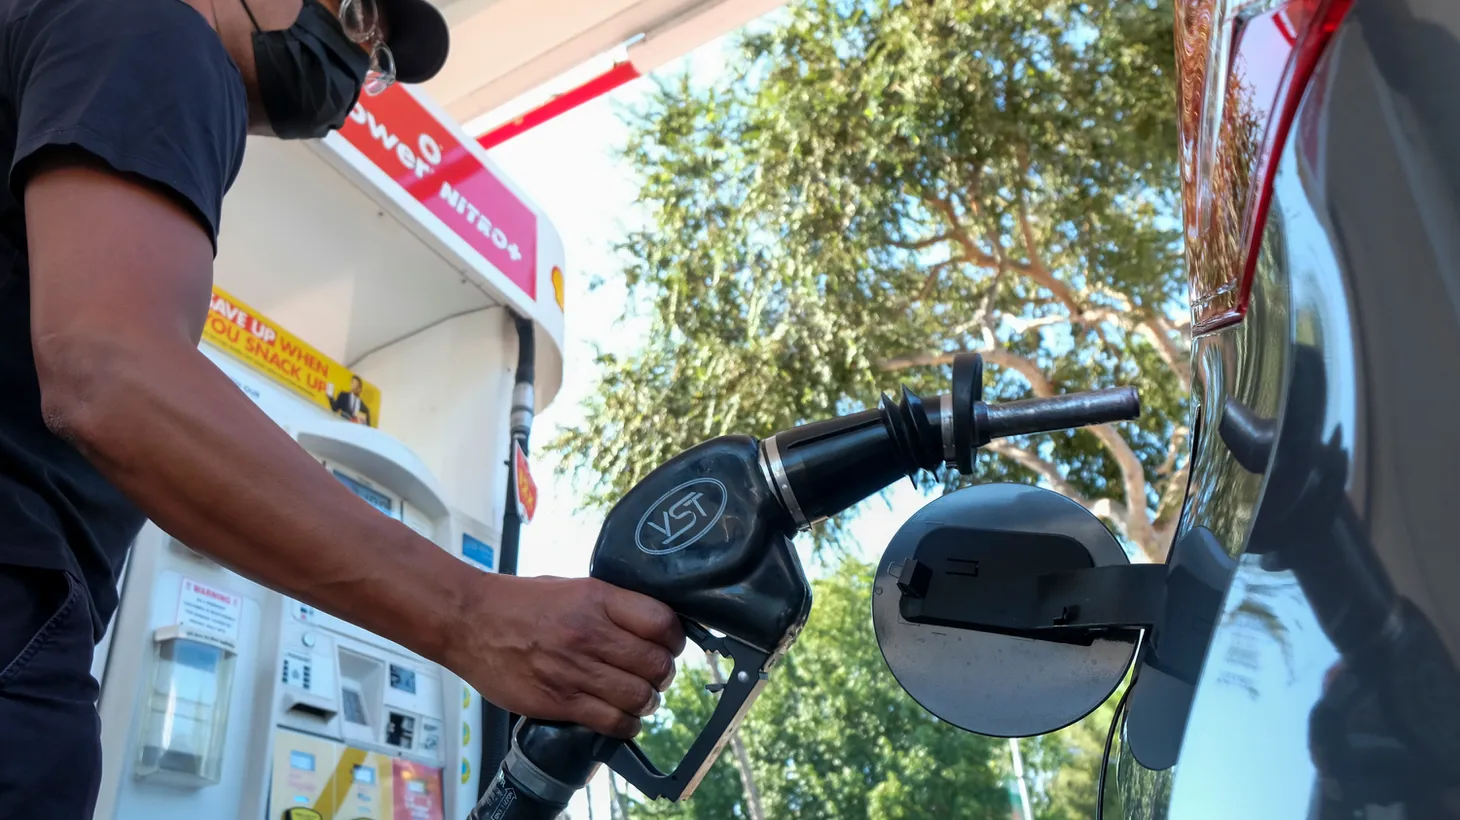 “The problem here is the U.S.,Europe, and developed countries’ dependence on oil and unwillingness to cut back oil consumption,” says UC Berkeley professor Severin Borenstein.